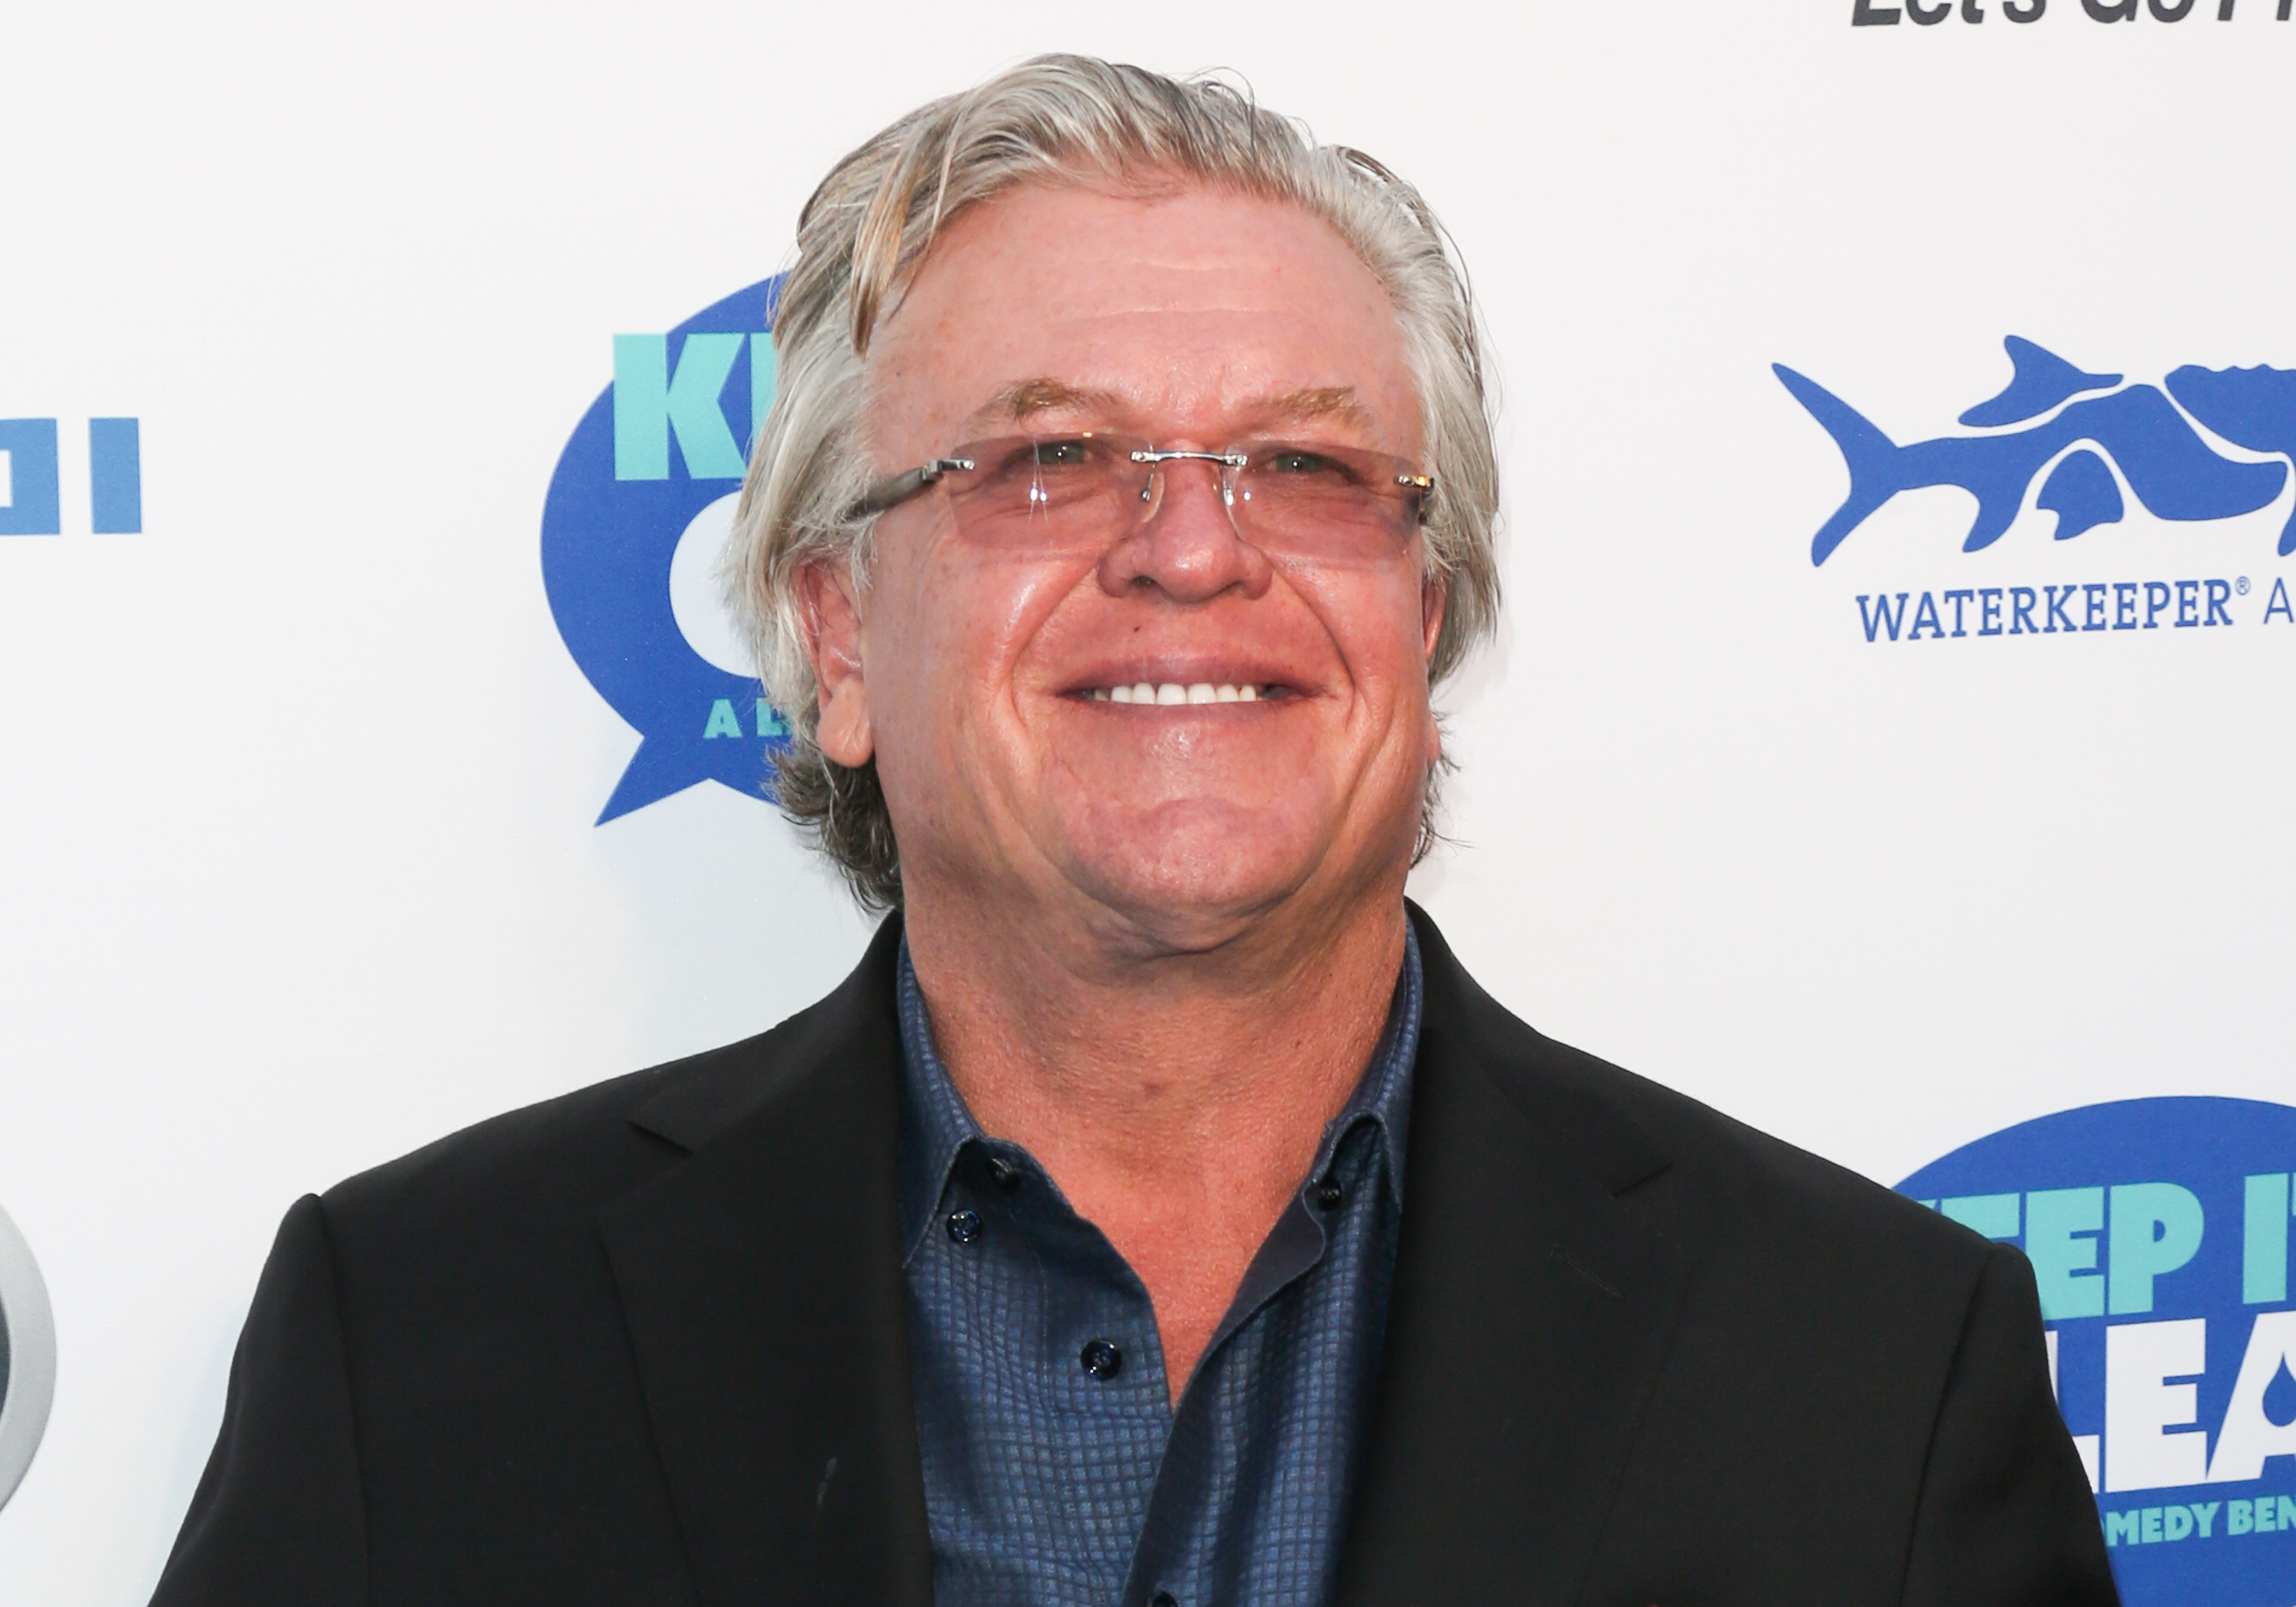 Ron White attends "Keep It Clean" a live comedy benefit for the Waterkeeper Alliance at Avalon on April 21, 2016, in Hollywood, California. | Source: Getty Images